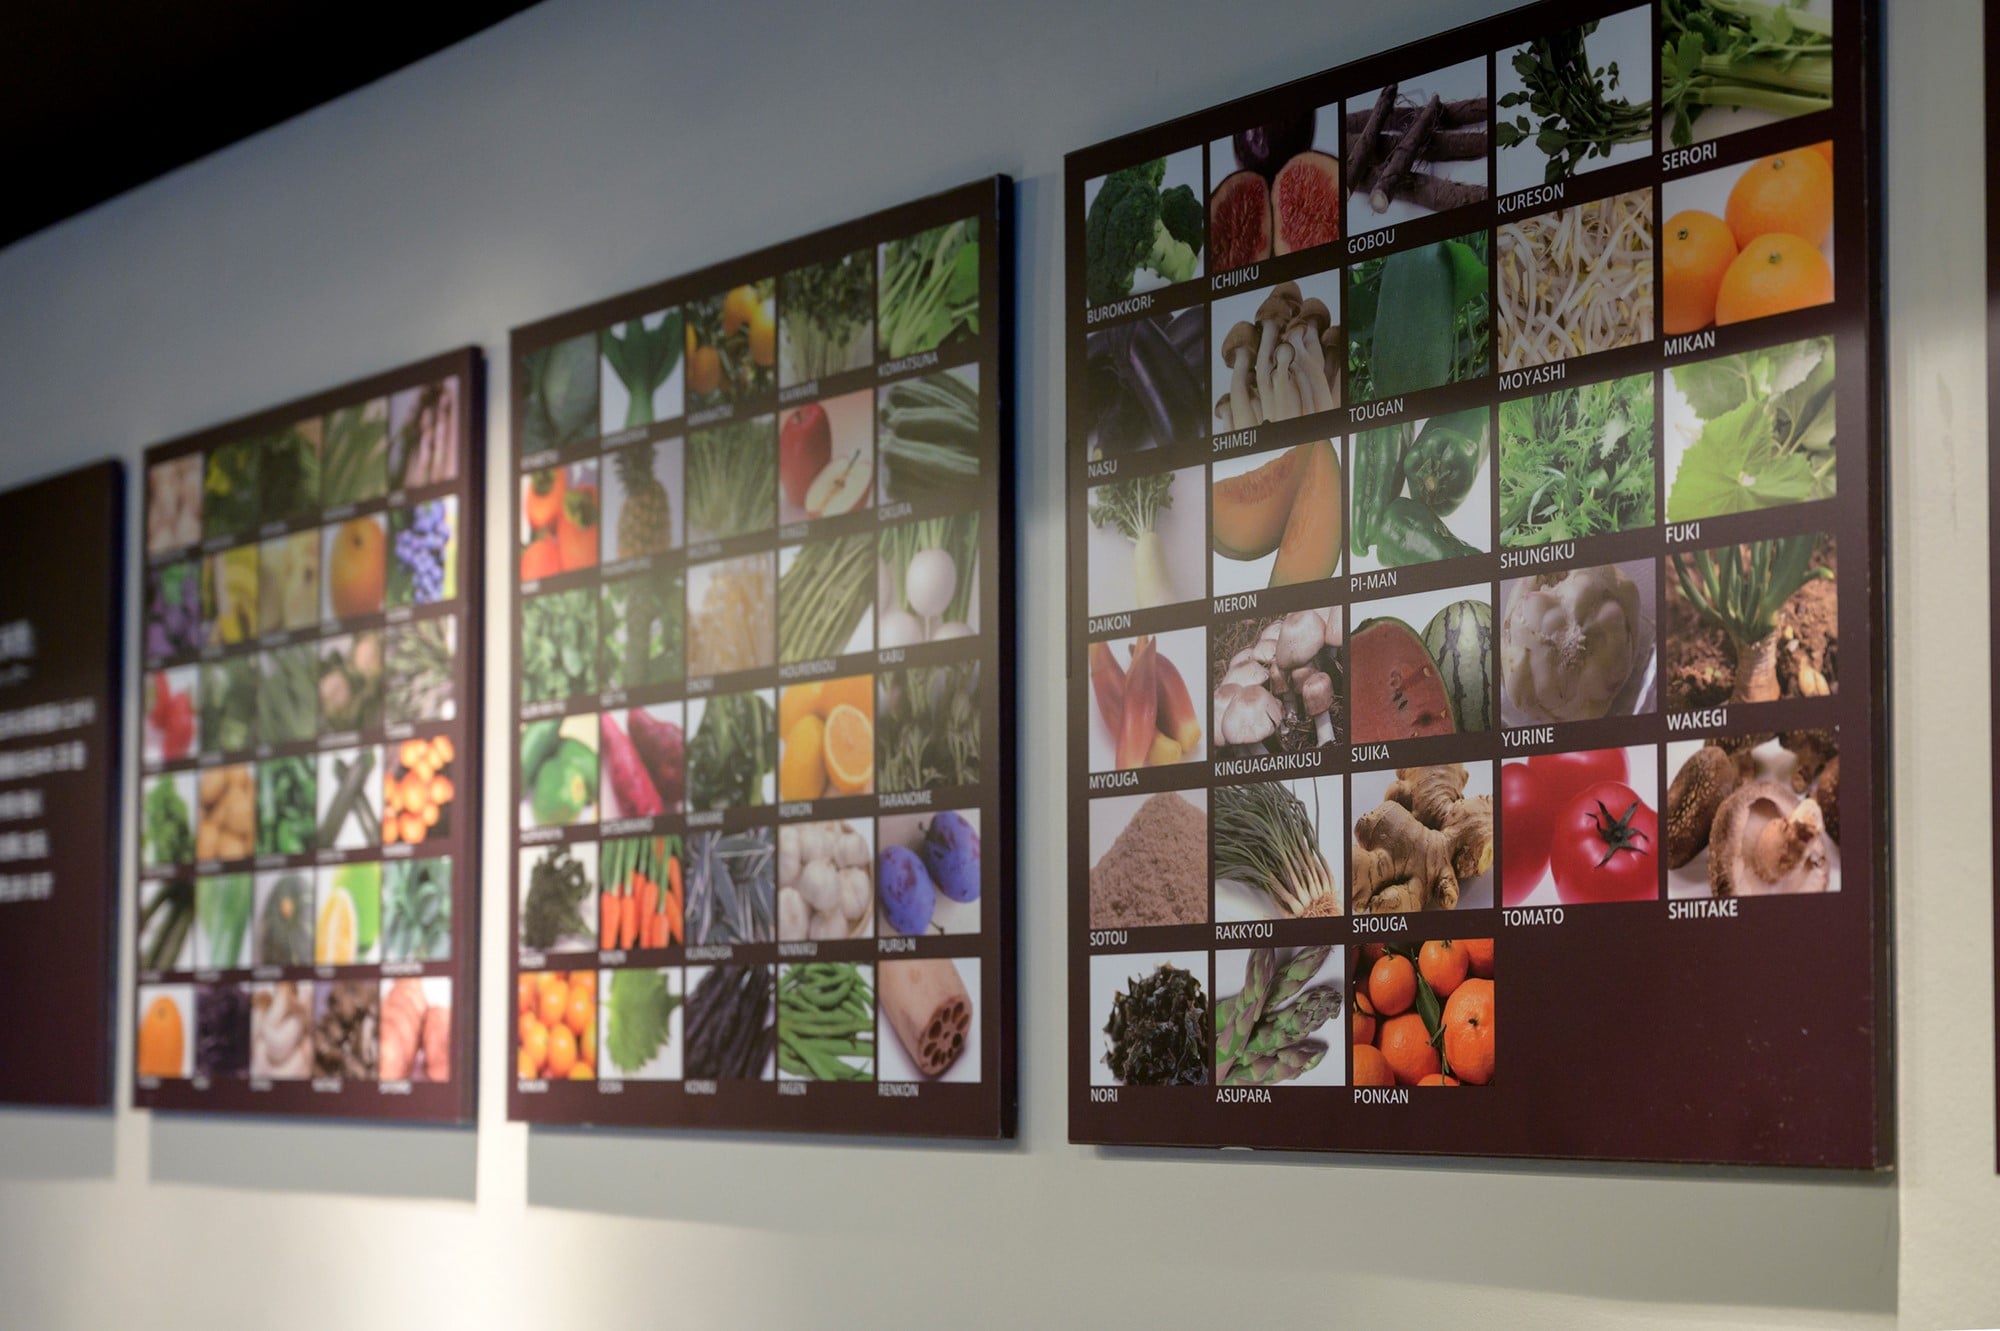 Images of more than 70 varieties of vegetables and fruits are displayed on the wall.